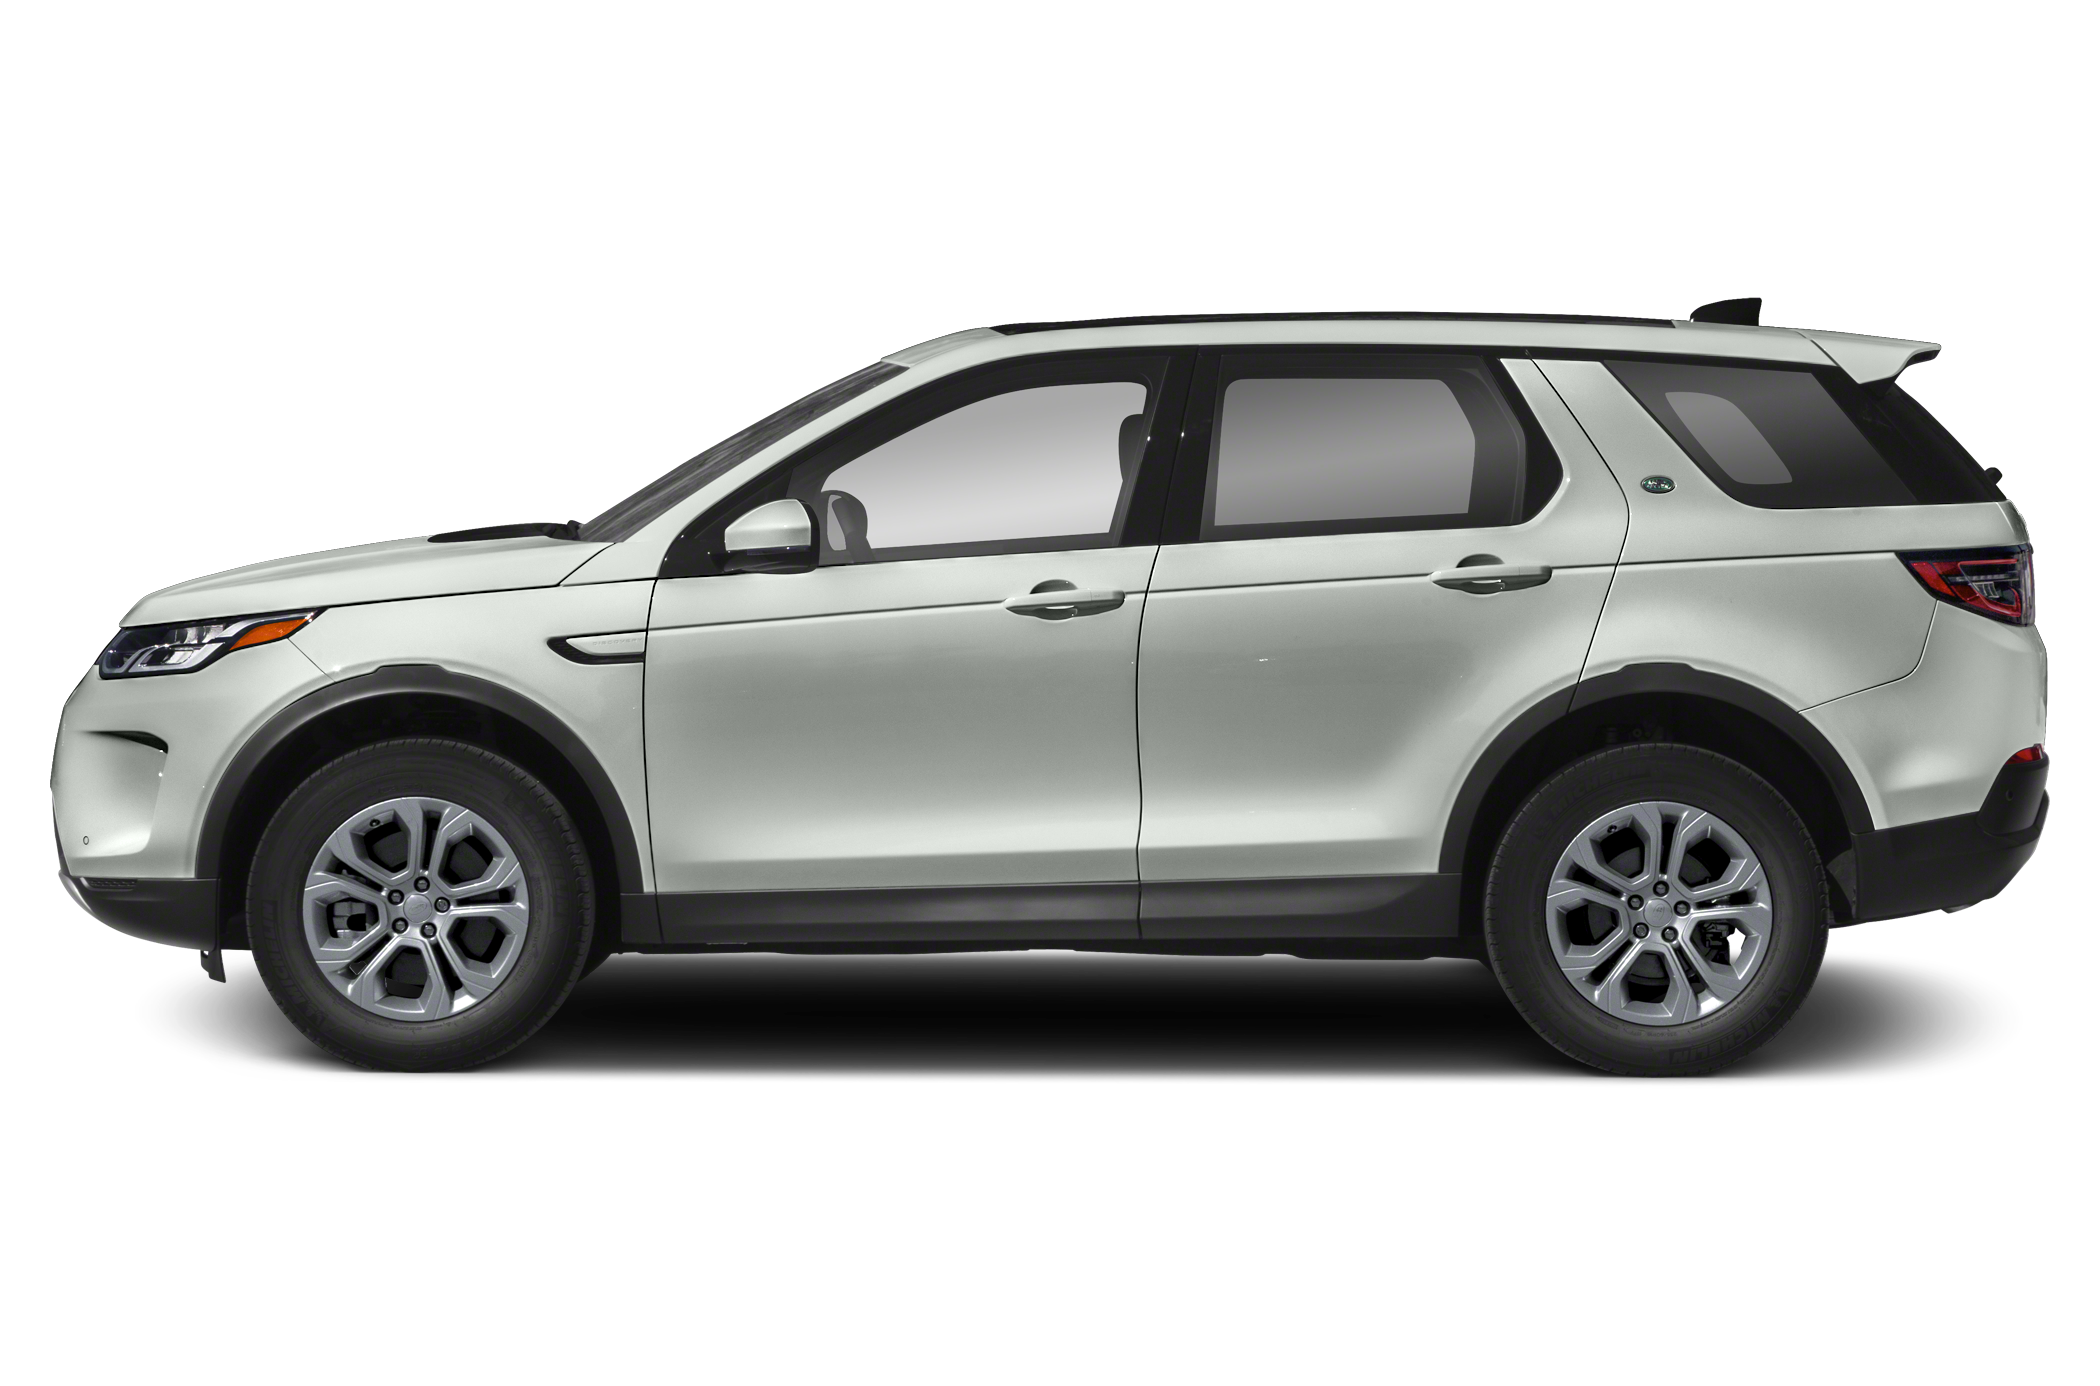 Land Rover Discovery Sport - Discovery Sport Price, Specs, Images, Colours